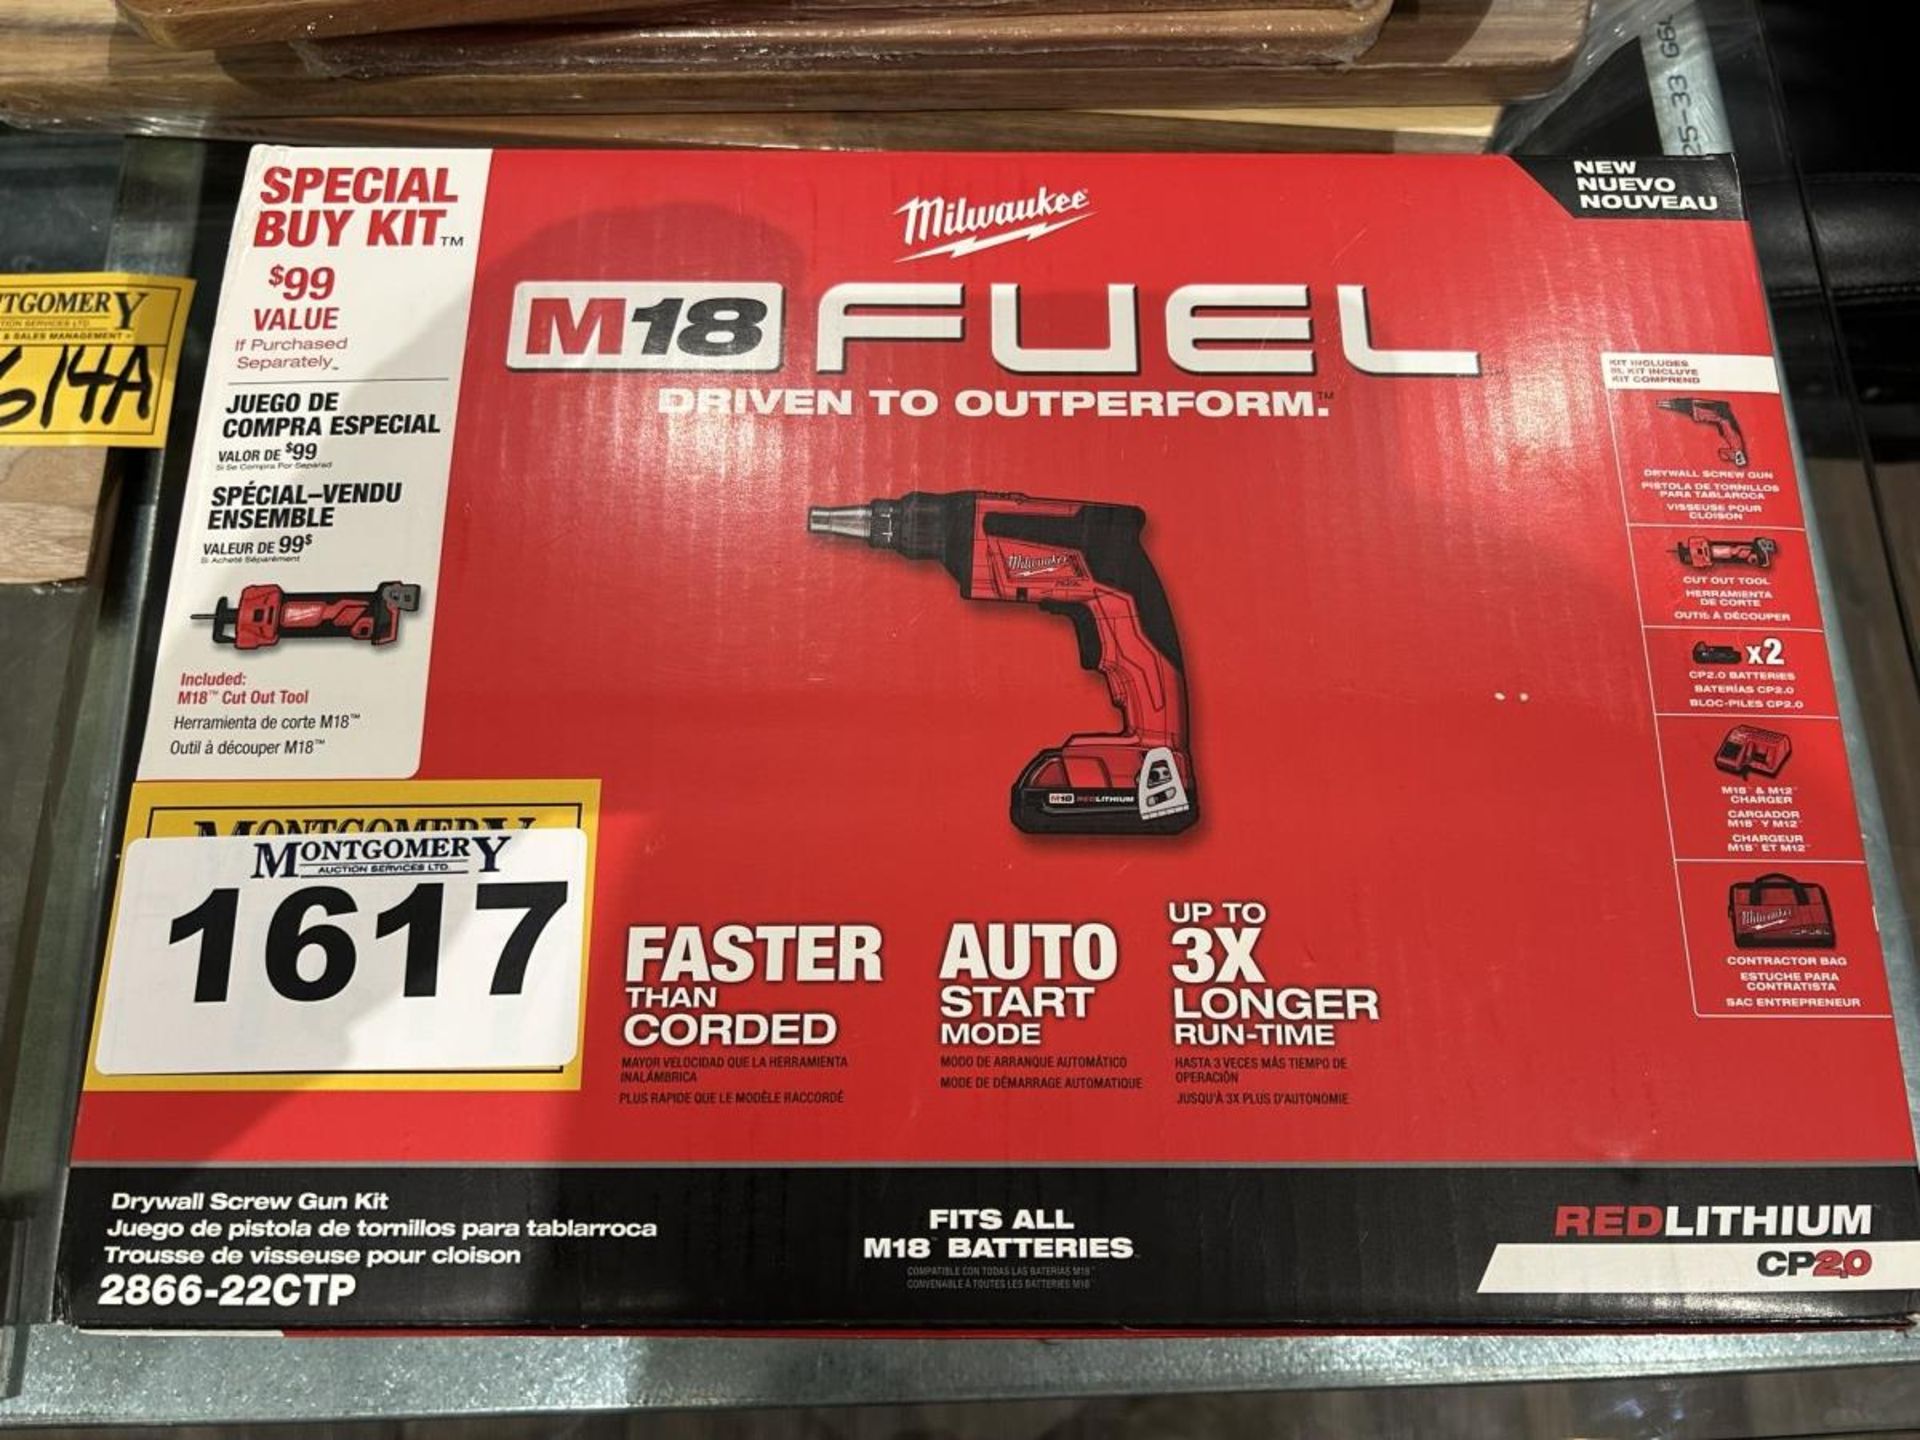 MILWAUKEE M18 FUEL CORDLESS SCREW GUN AND CUT OUT TOOL W/ 2 BATTERIES AND CHARGER (NEW IN BOX)